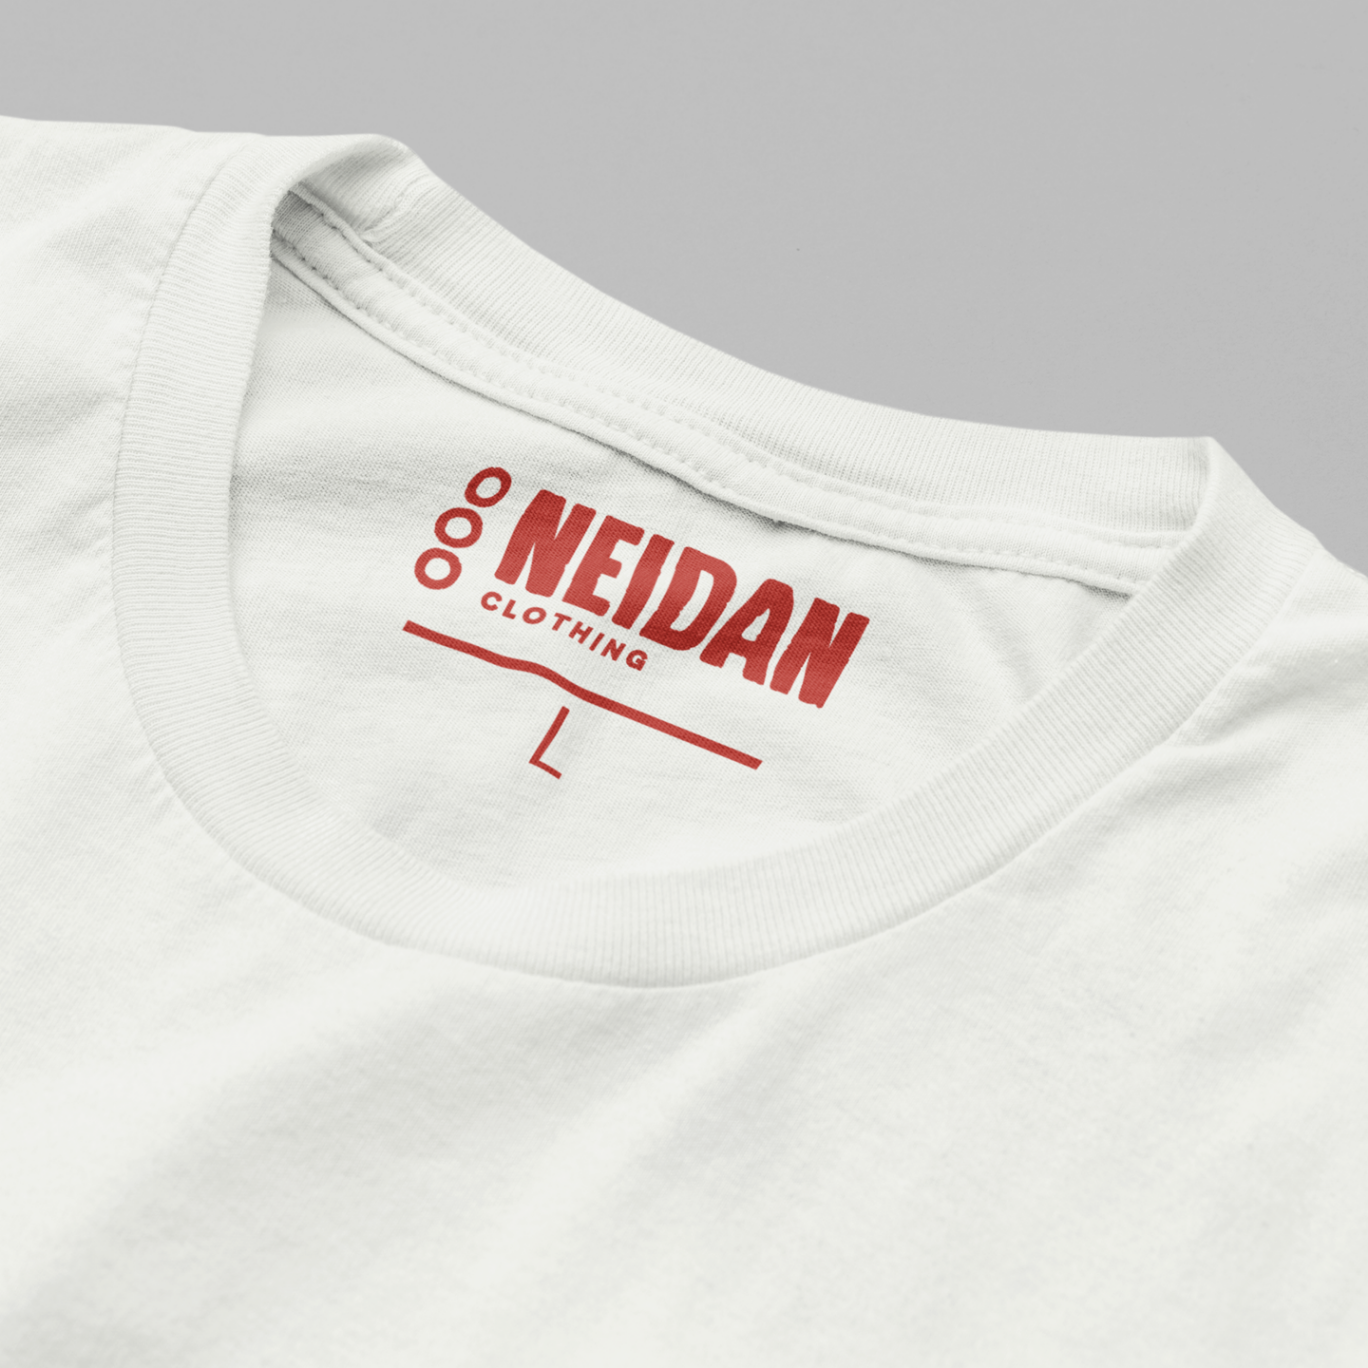 closeup of a white t shirt neck label with the neidan clothing logo